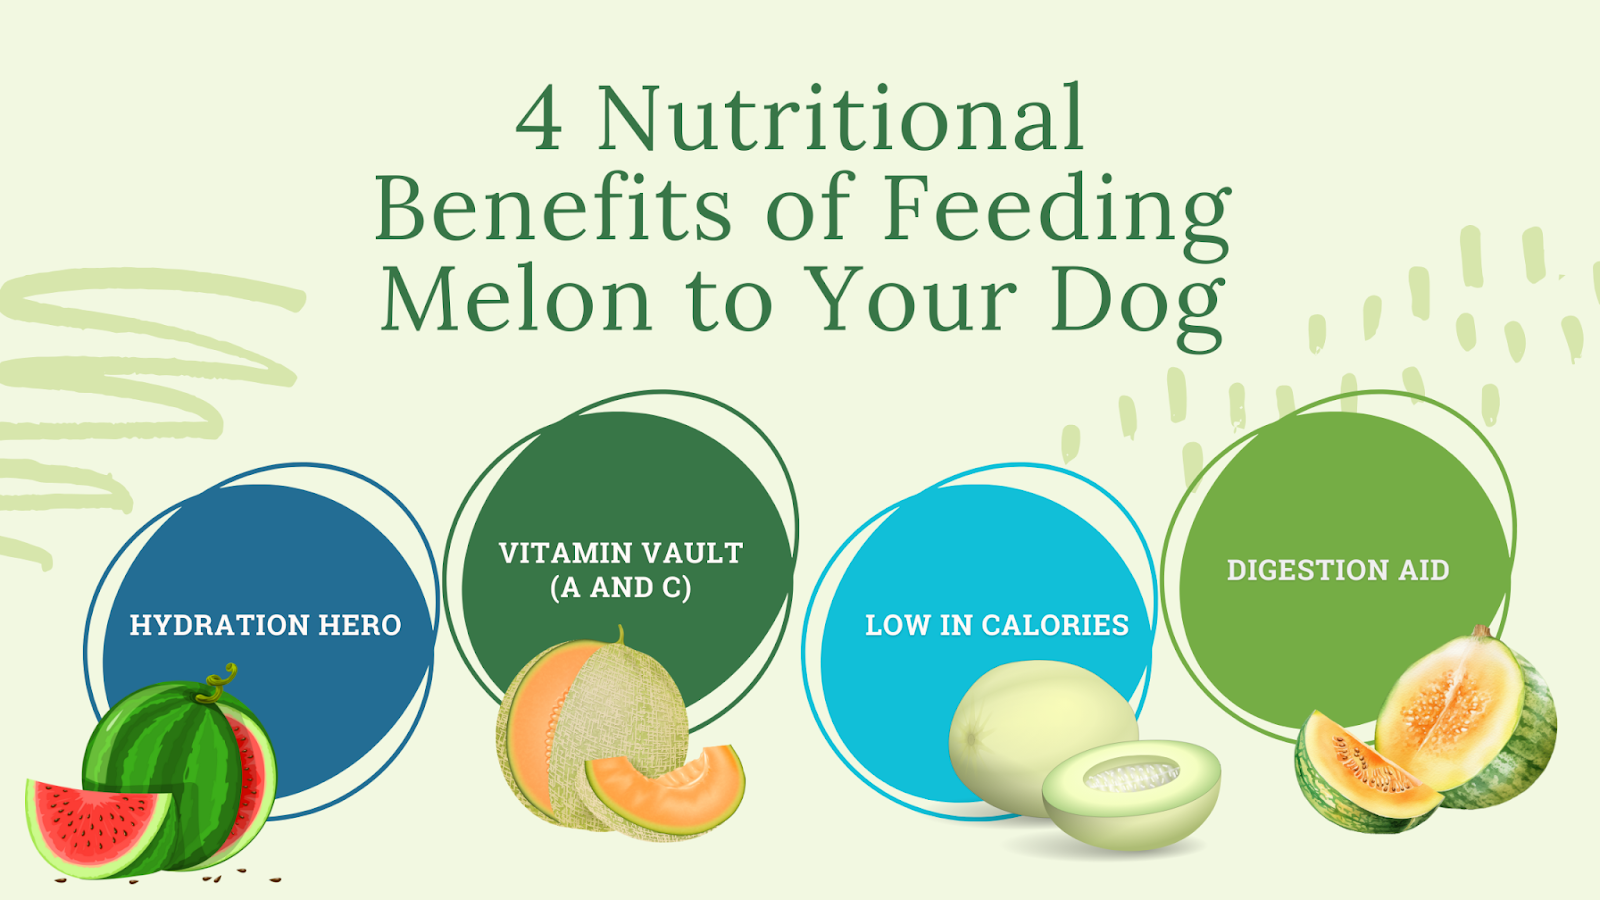 Nutritional benefits of feeding melon to dogs